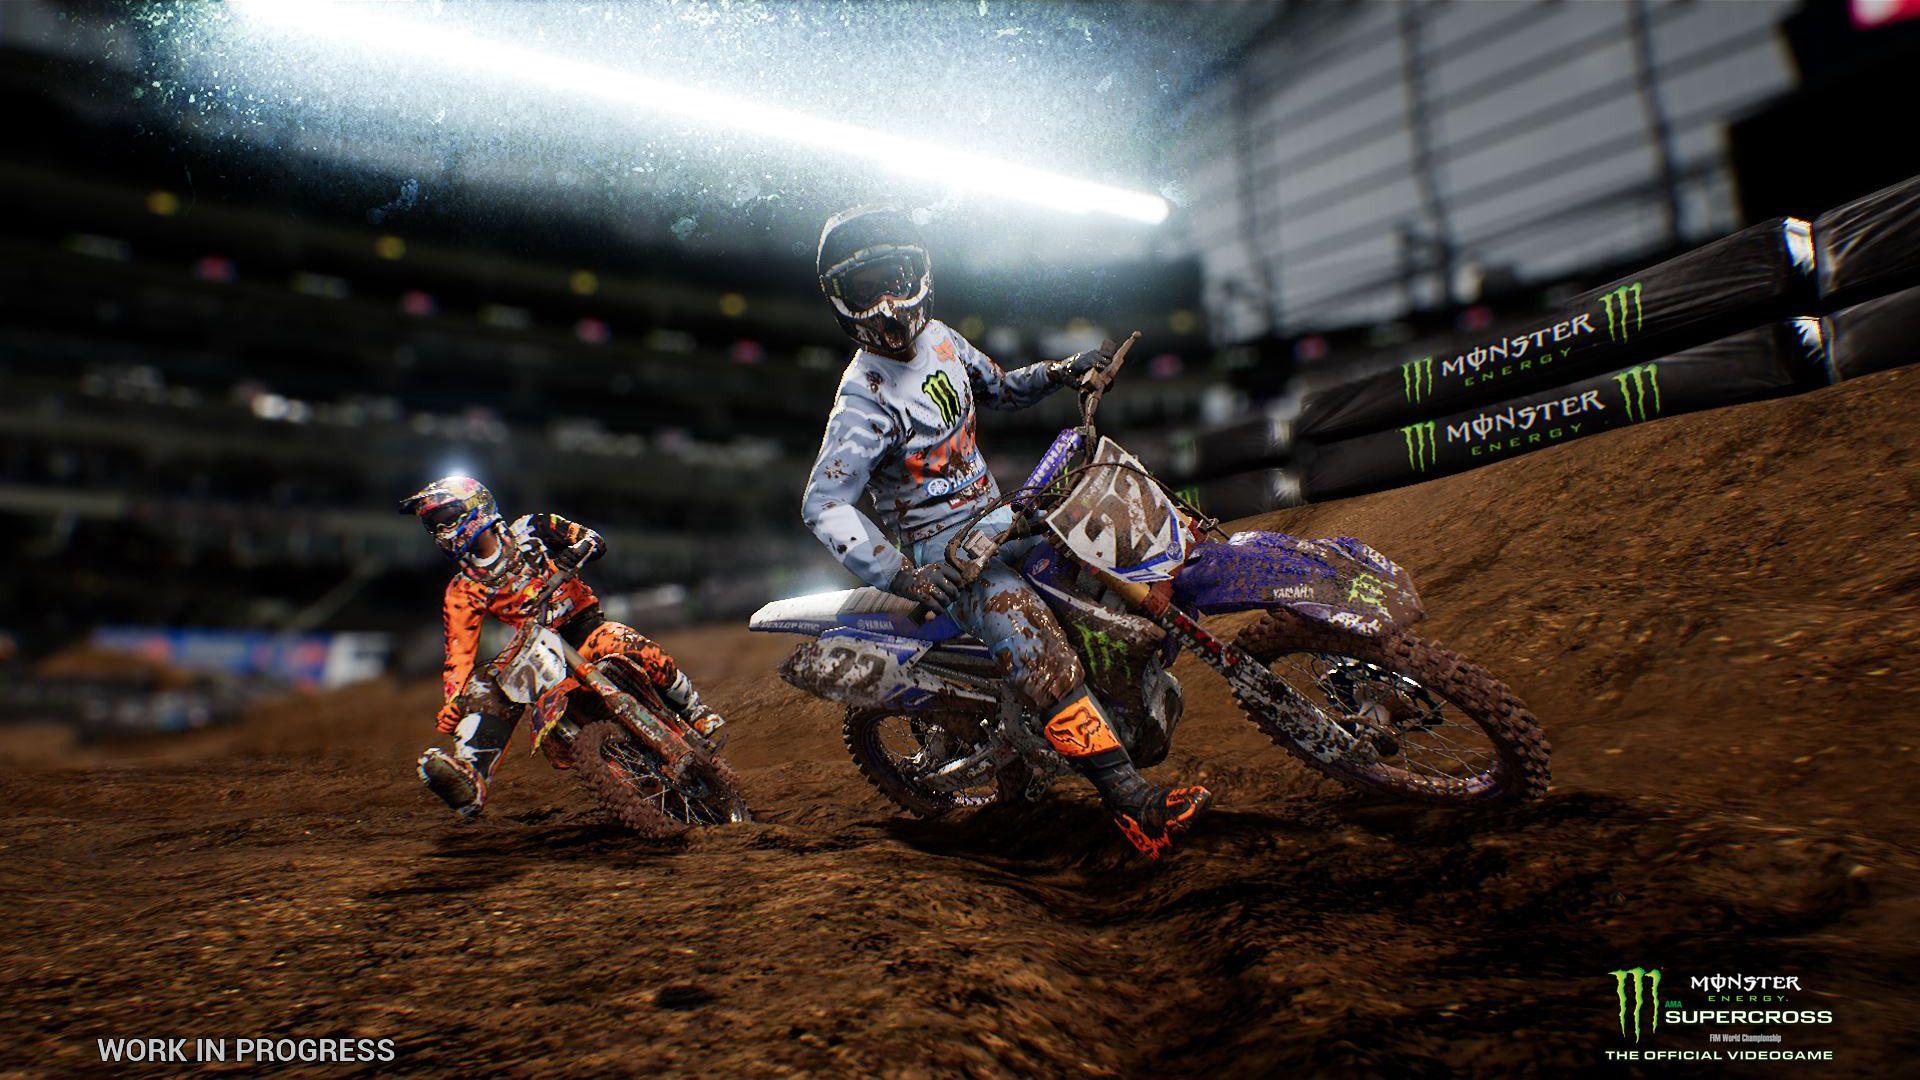 The First Official Monster Energy Supercross Videogame Announced